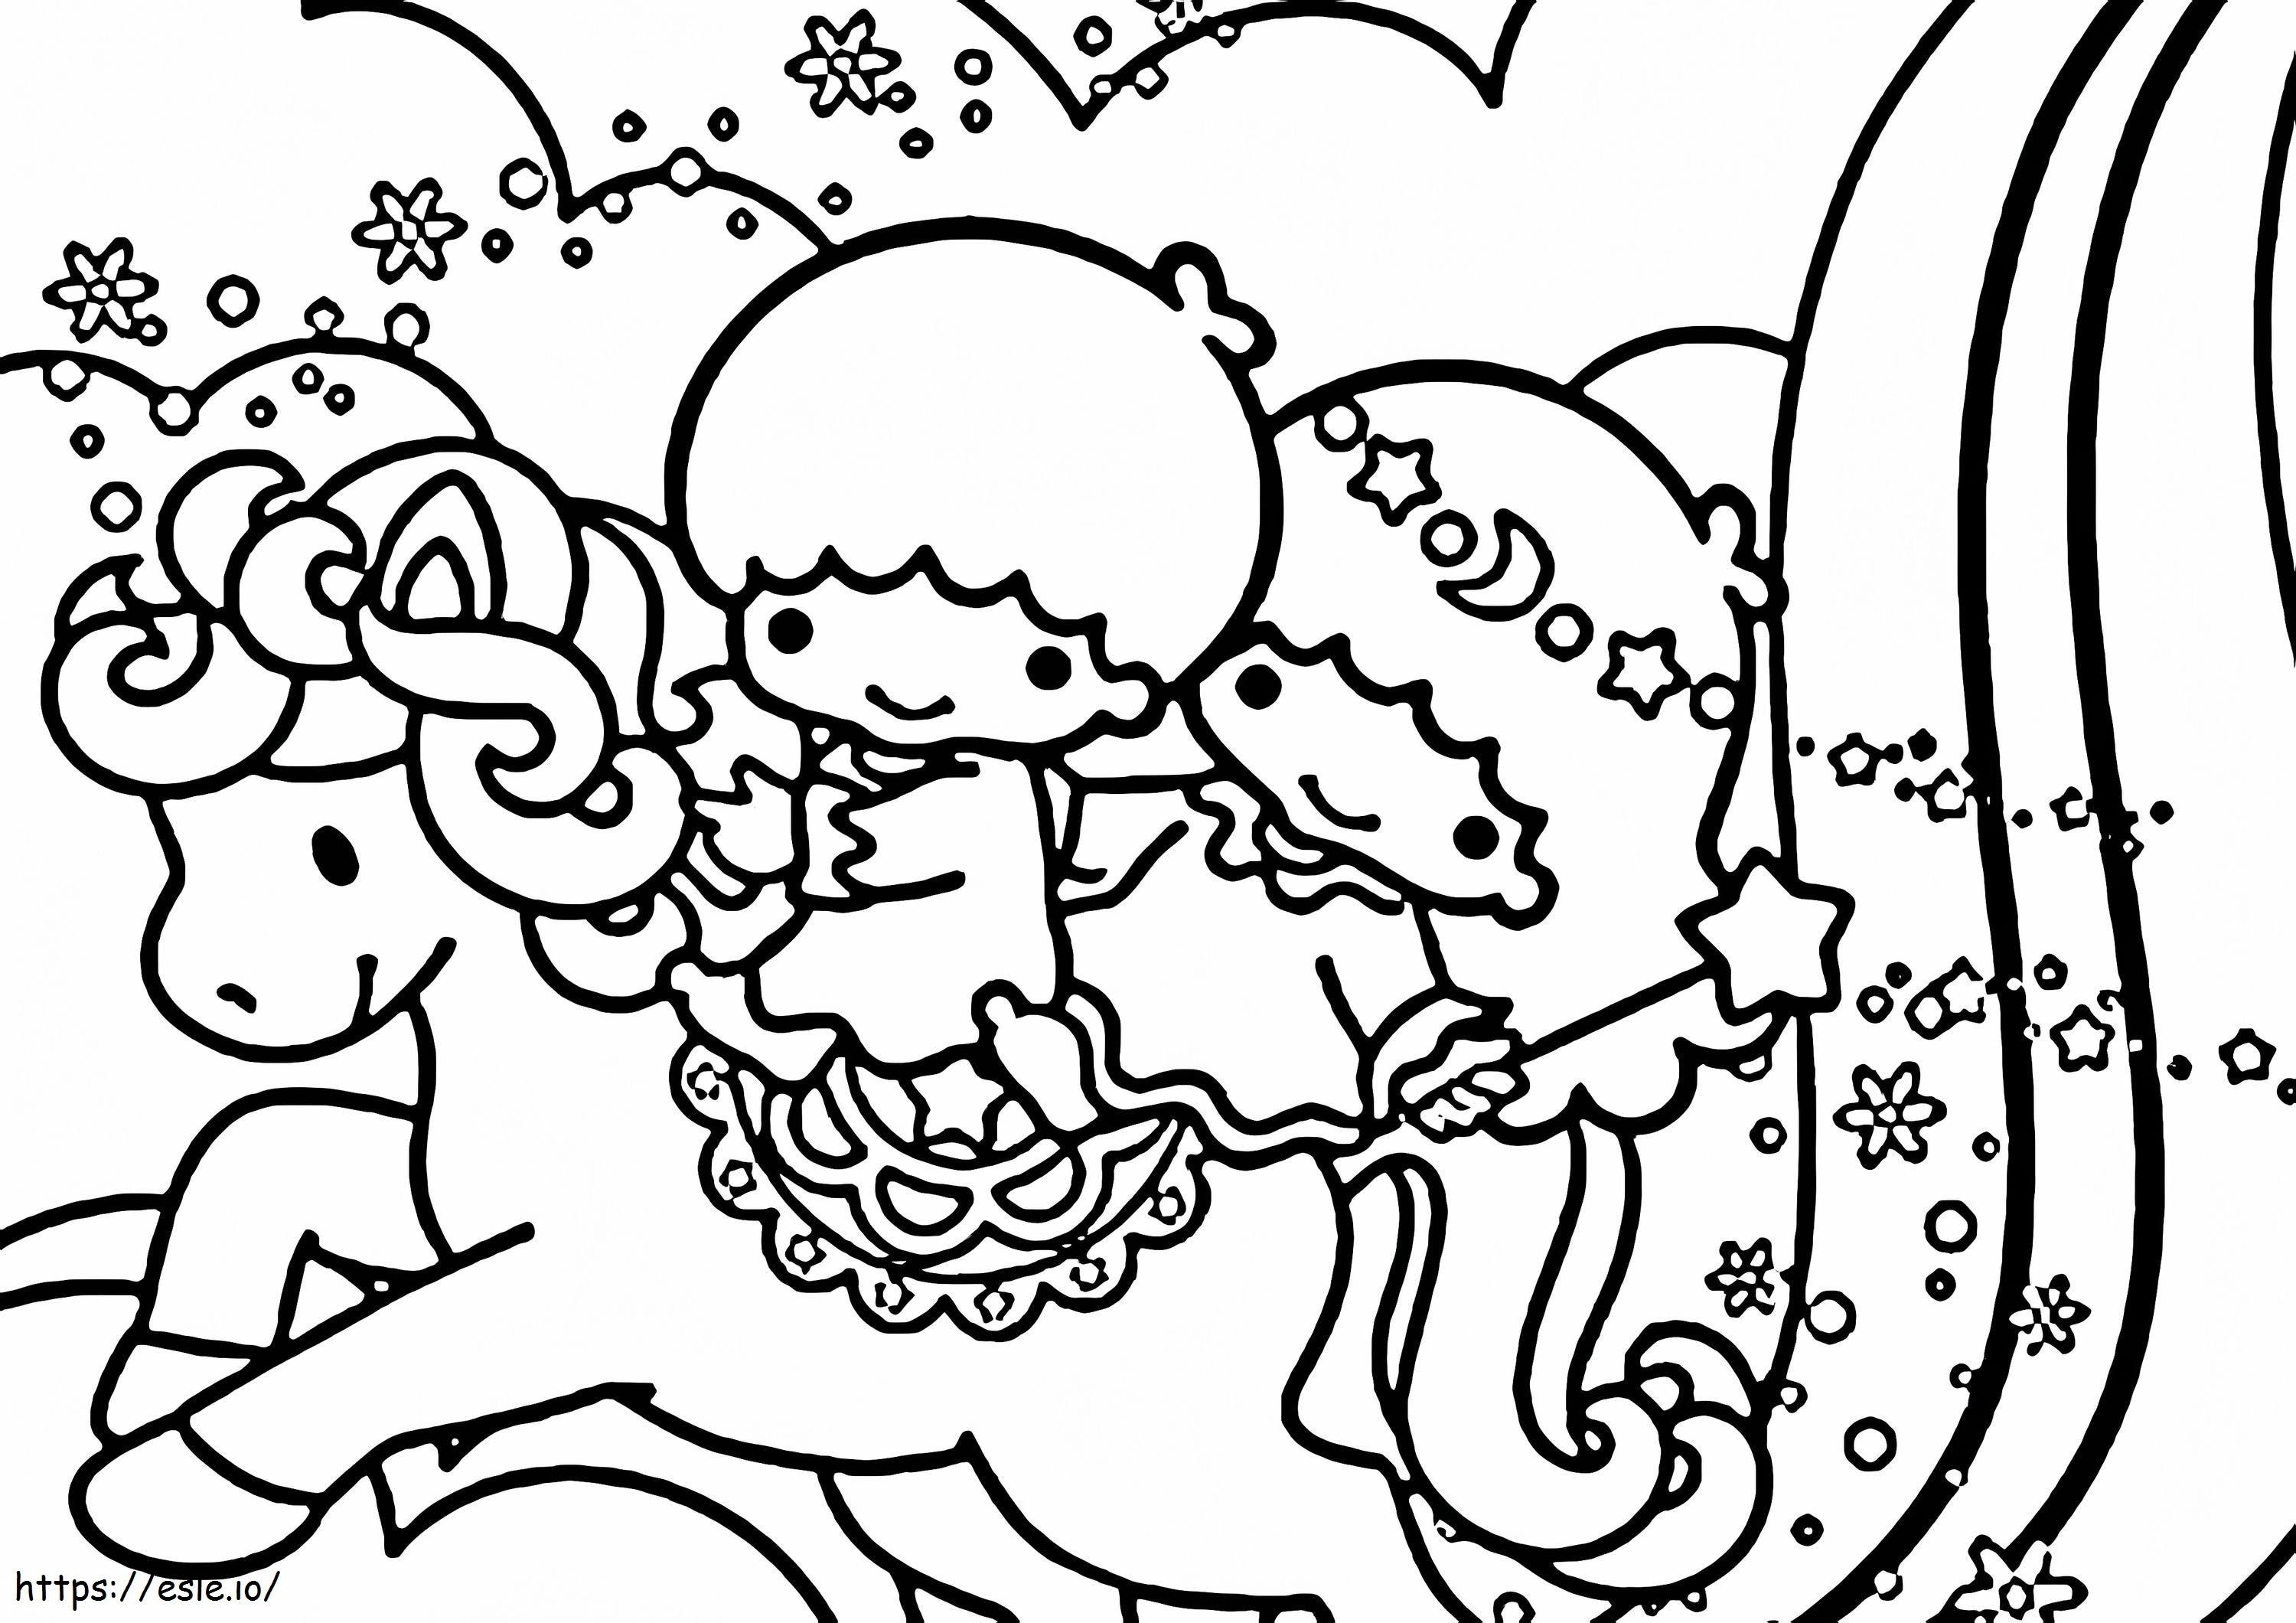 Marvellous Little Twin Stars coloring page